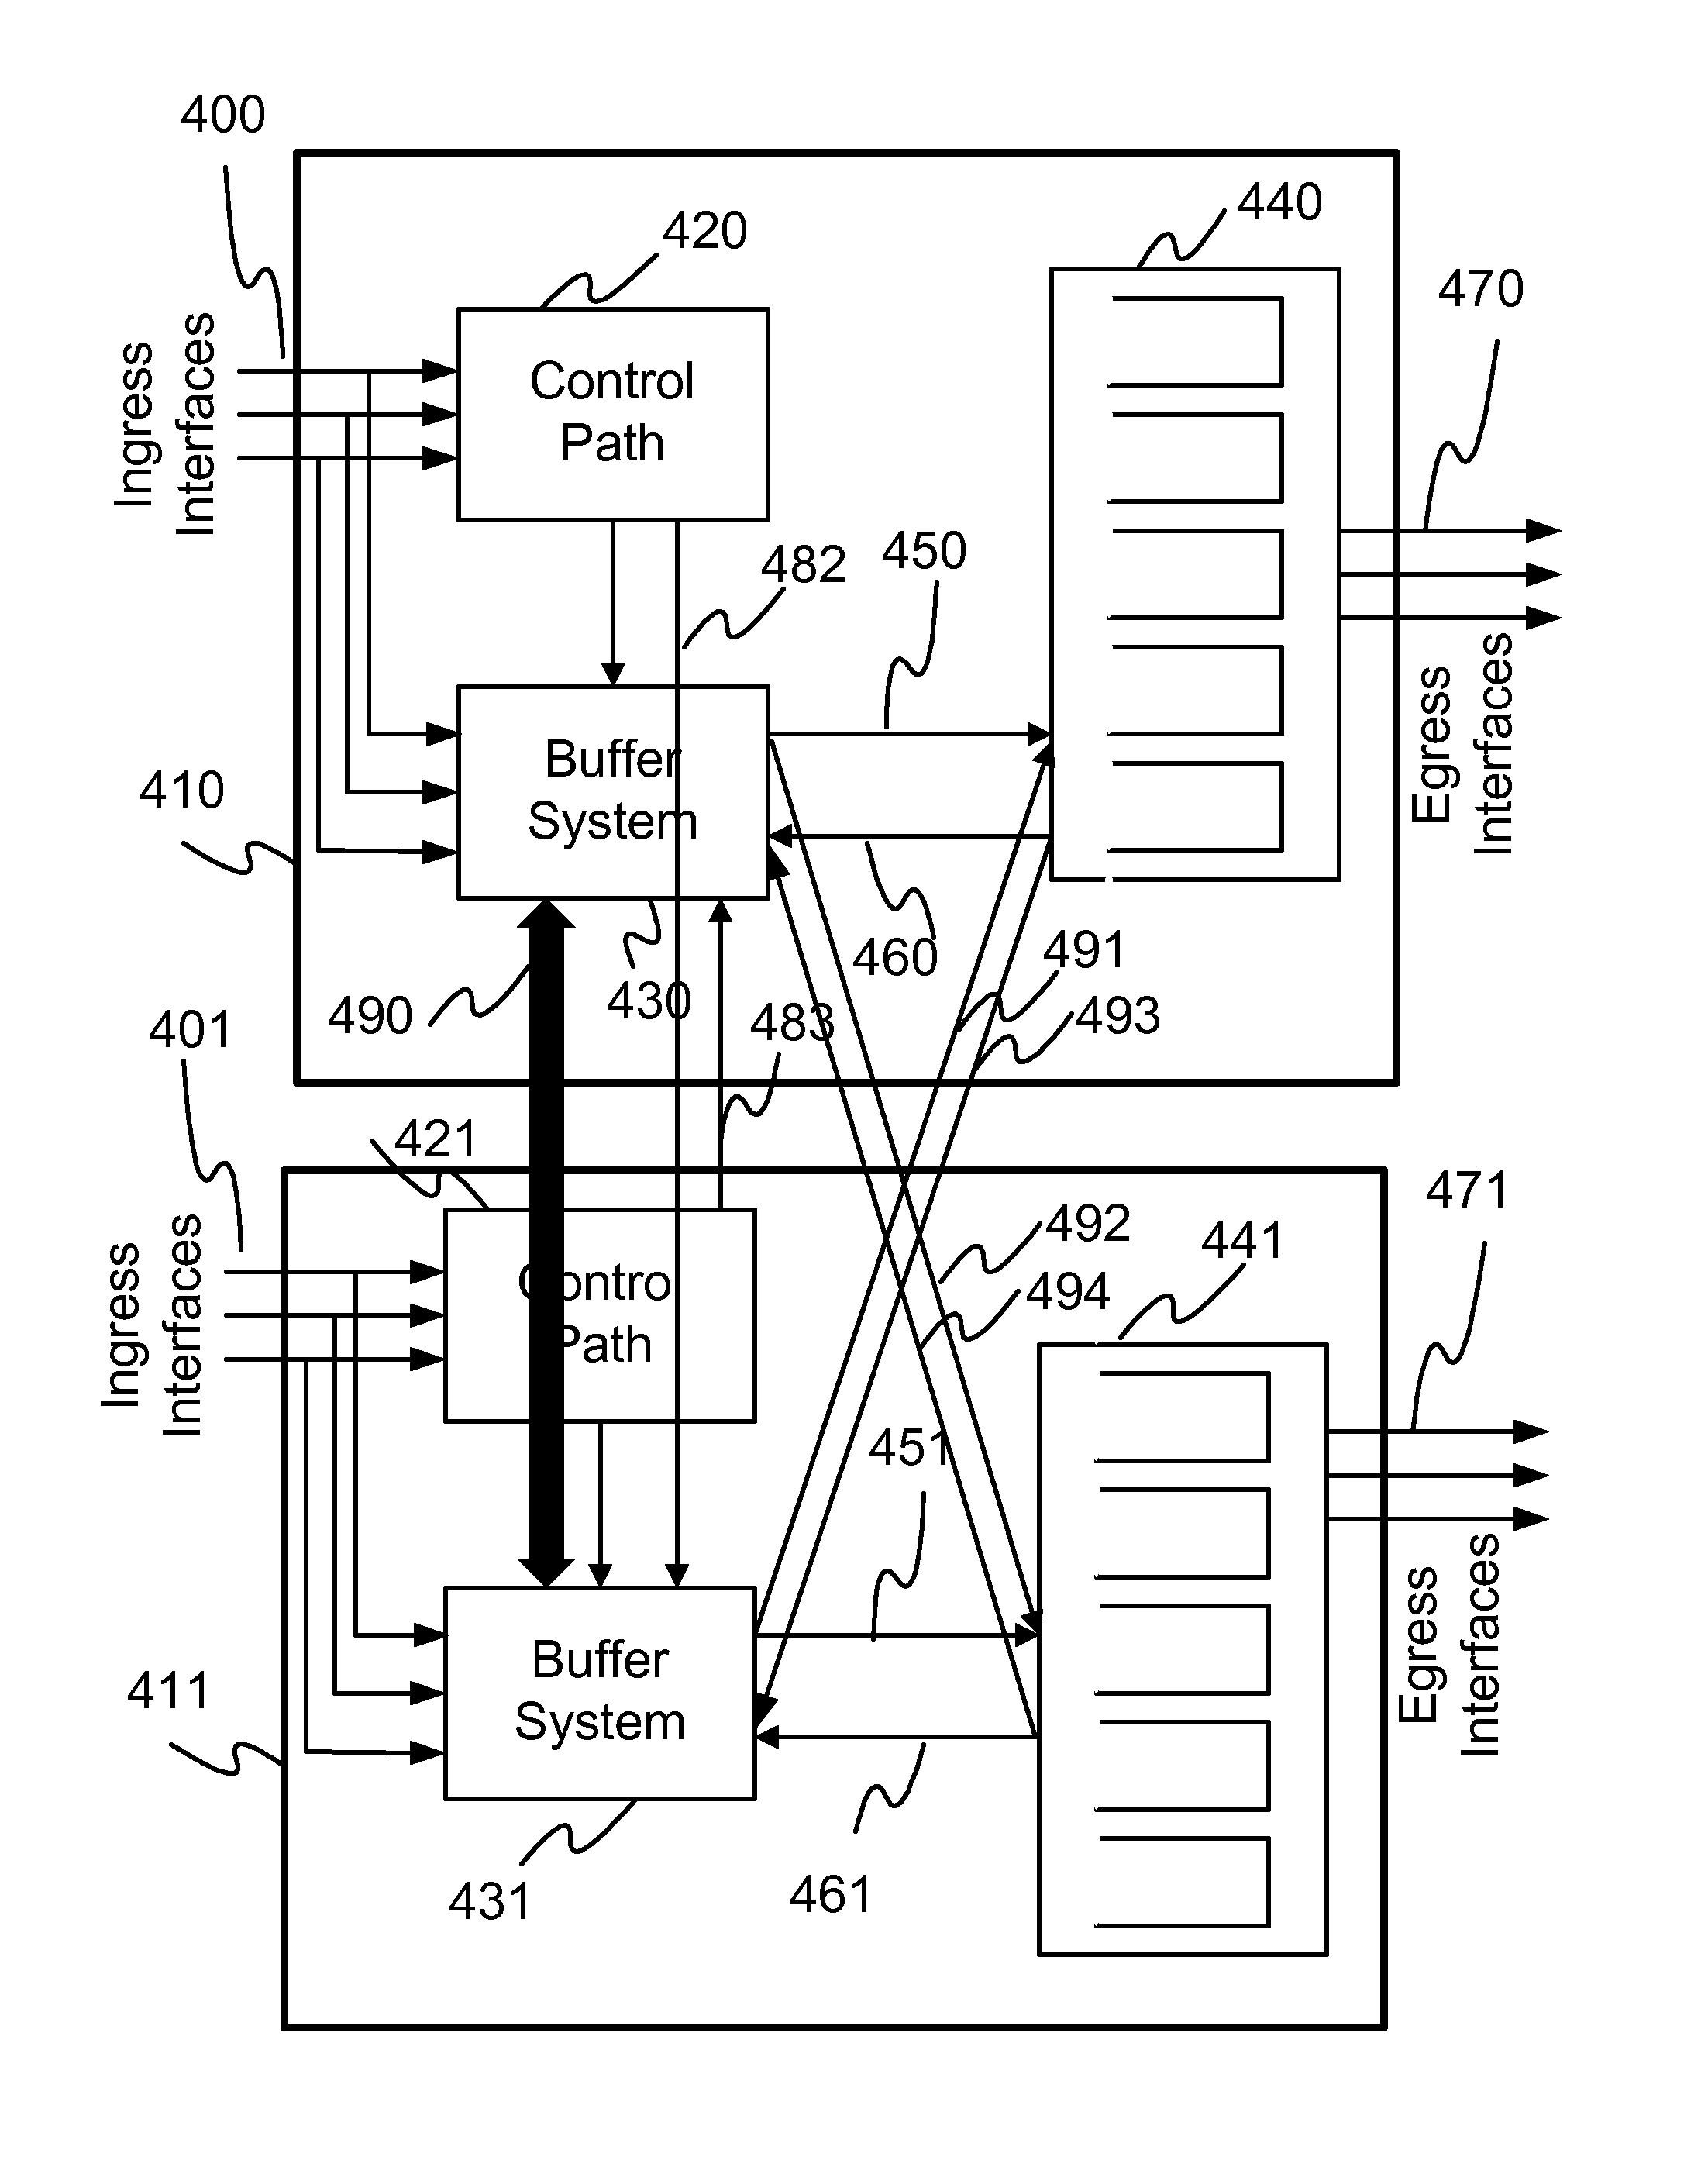 System and Method for Creating a Scalable Monolithic Packet Processing Engine